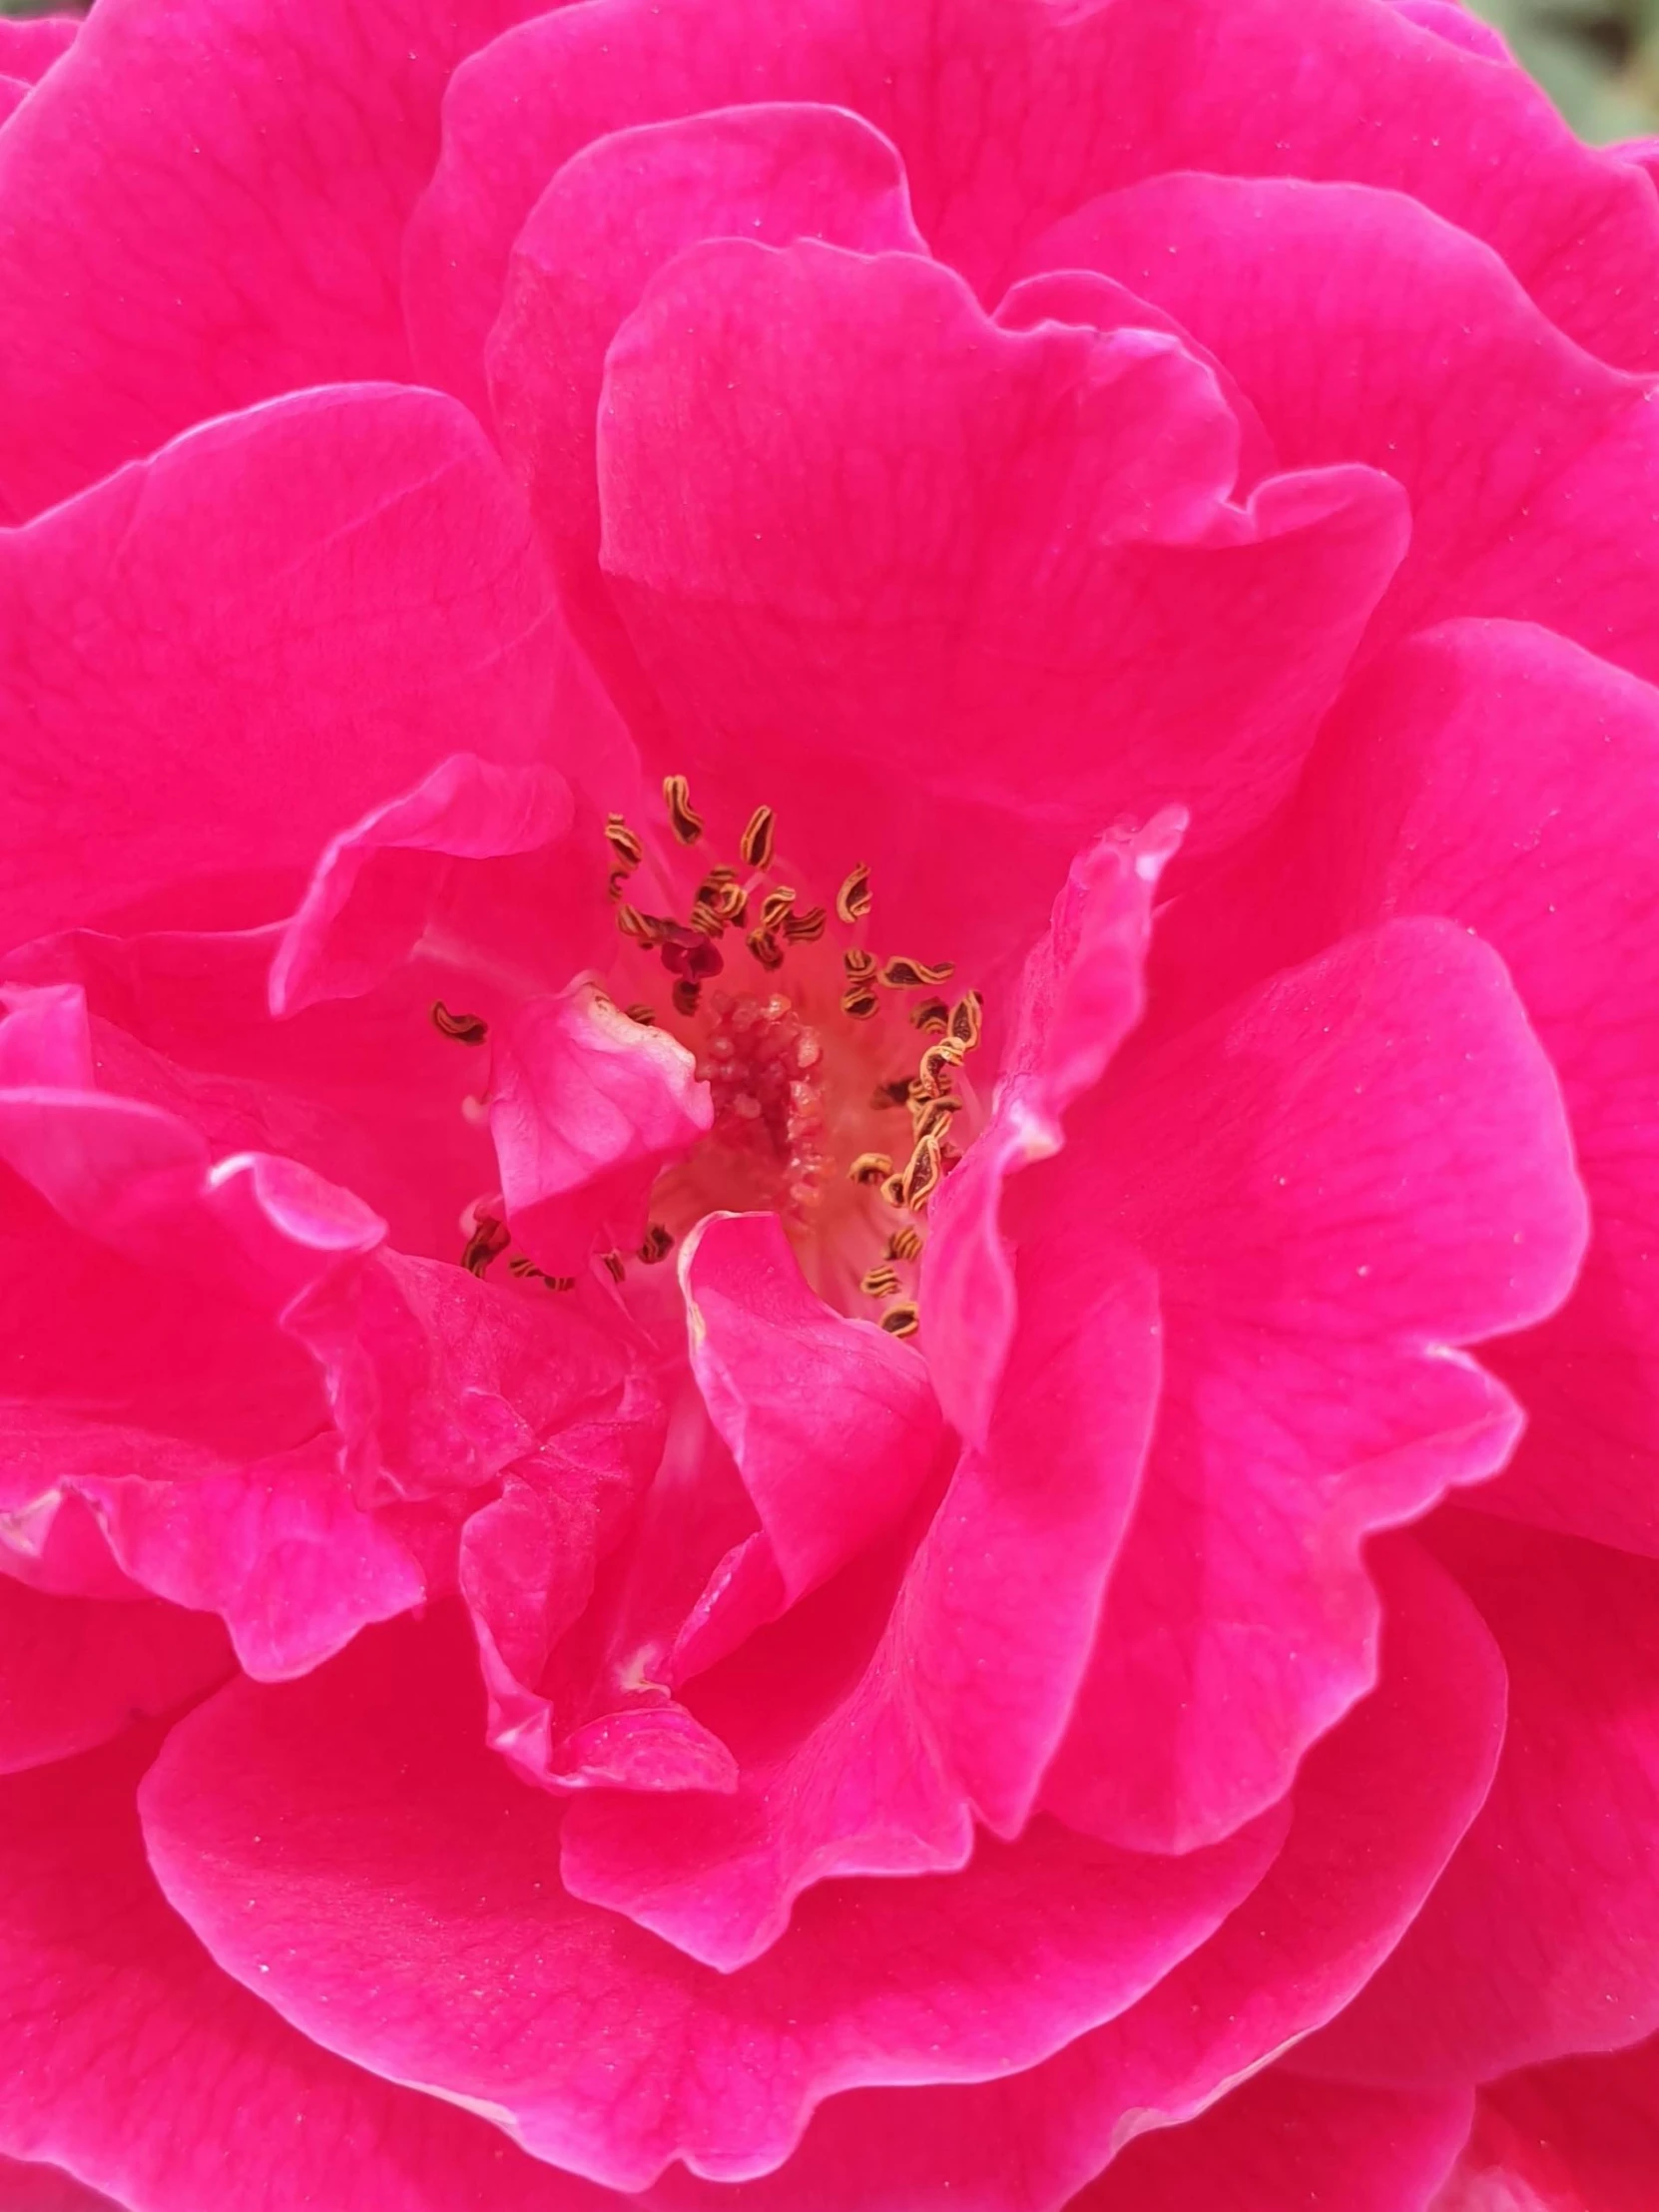 a close up of a very bright pink rose